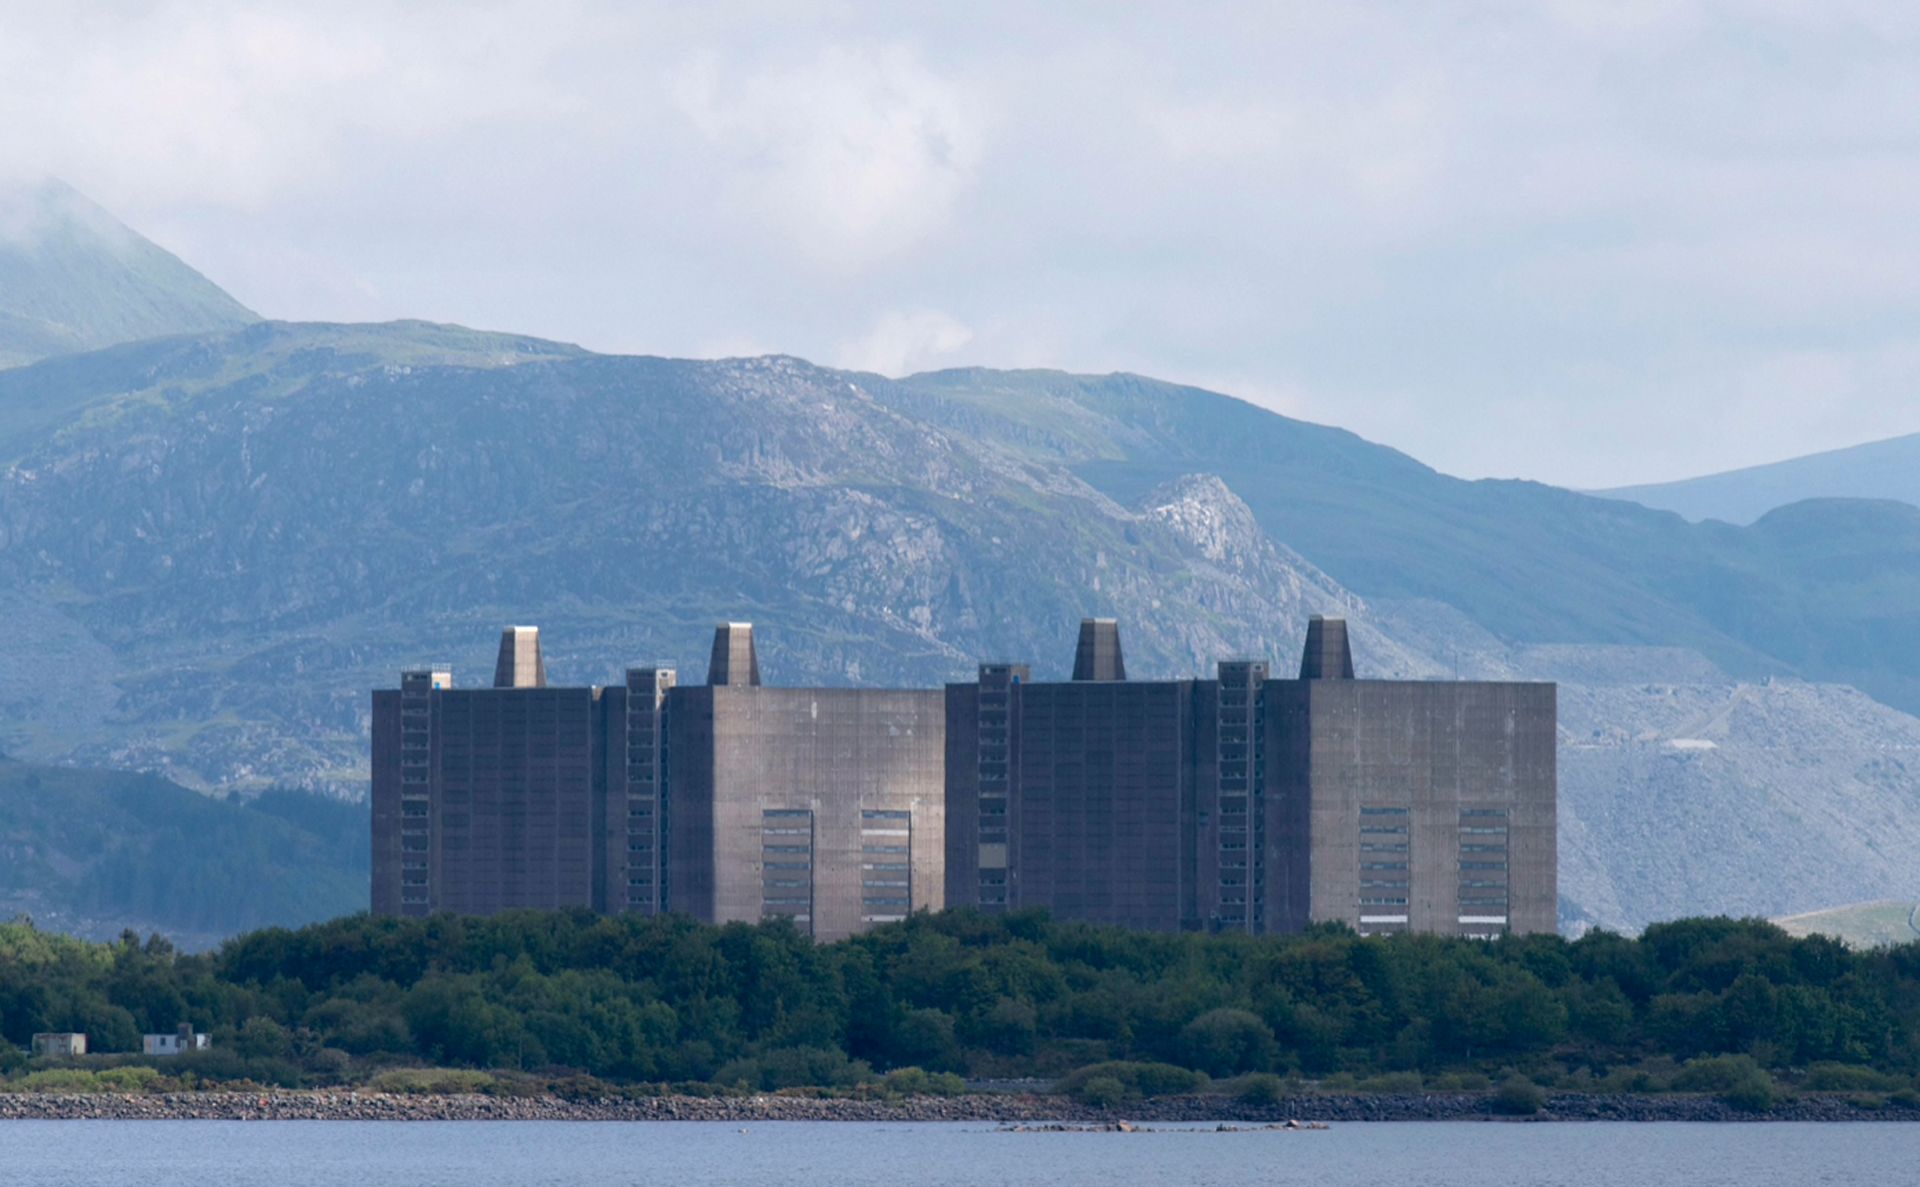 Designed by Basil Spence, Trawsfynydd Power Station was commissioned for the then-newly designated Snowdonia National Park in 1959. The site is expected to be returned to its ‘pre–nuclear’ state by 2083, 92 years after its closure.